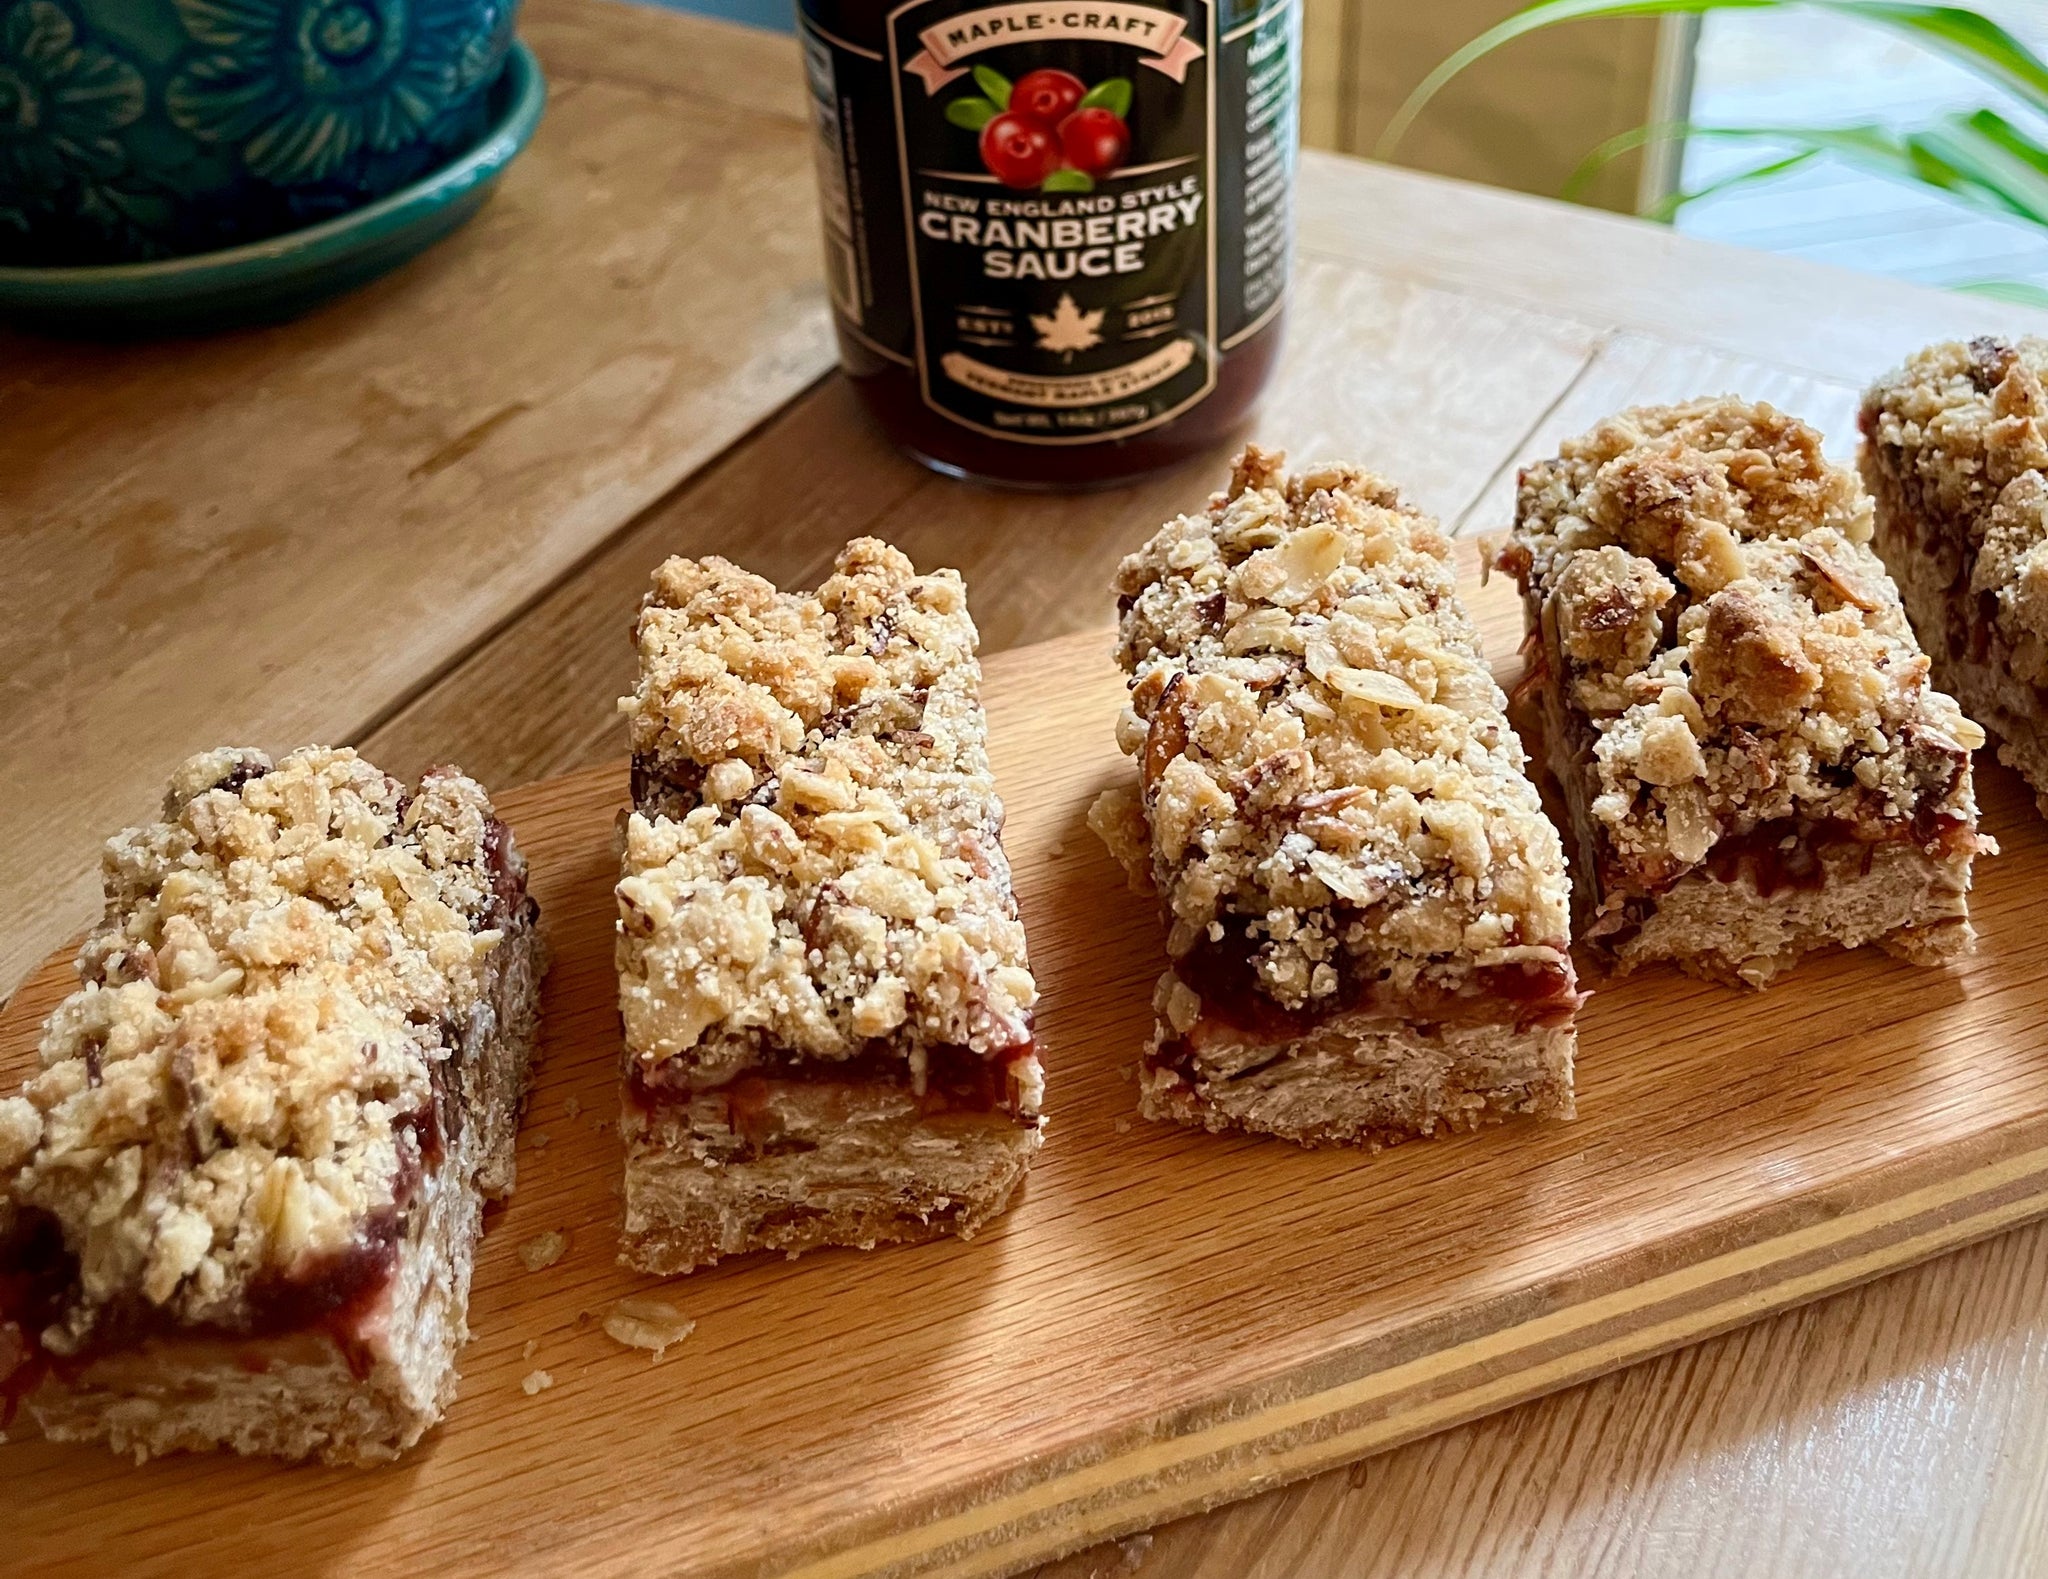 MAPLE-CRAFTED CRANBERRY GRANOLA BARS